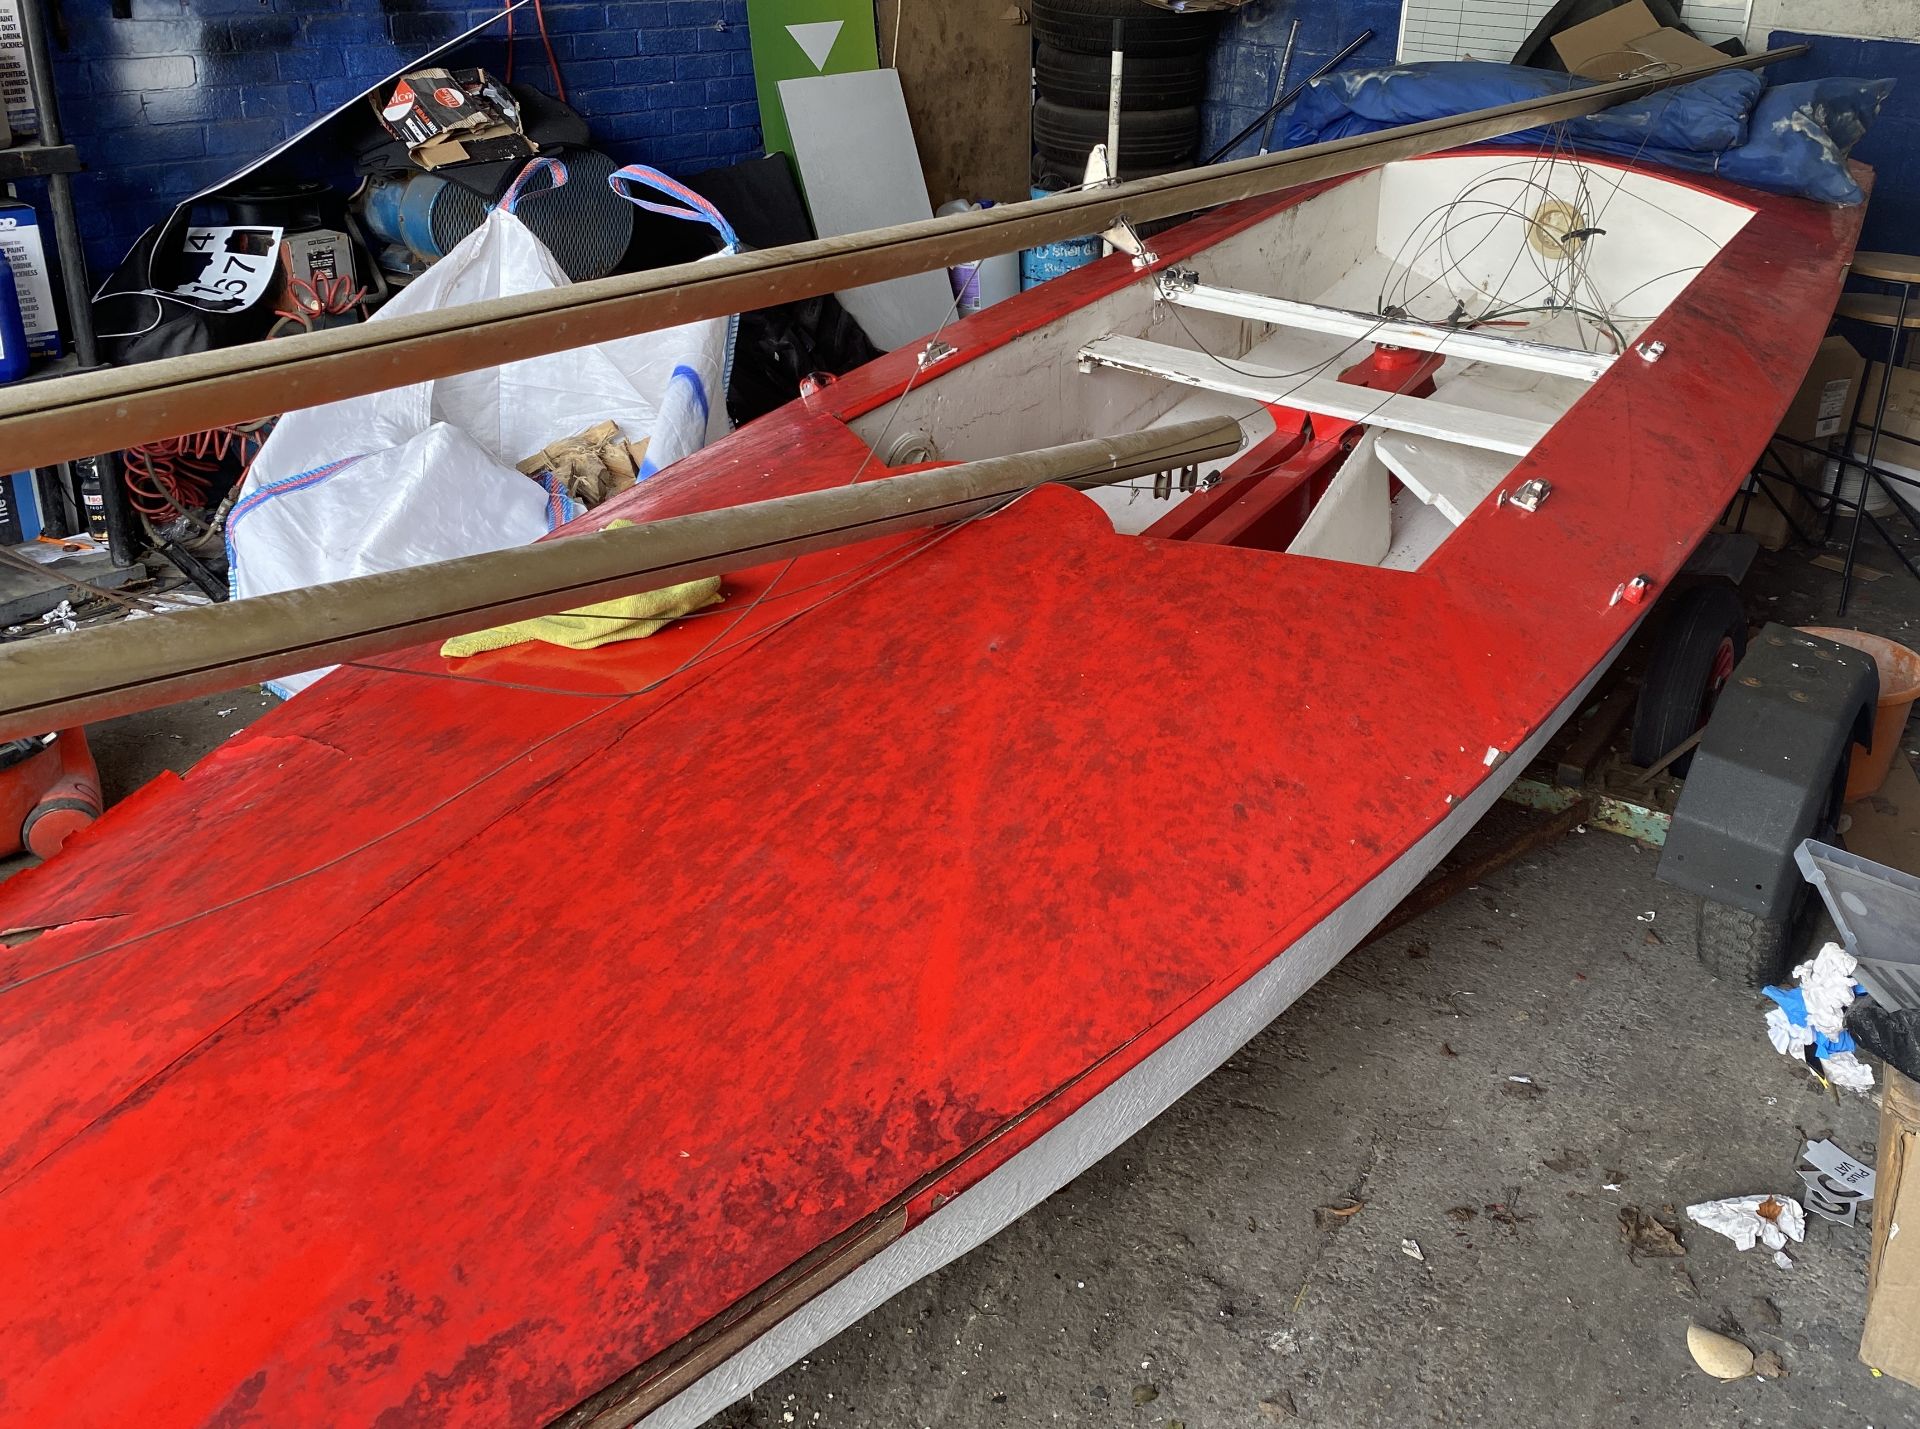 Red and white Fireball sailing boat with a 9' 9" (297cm) mast. - Image 21 of 24